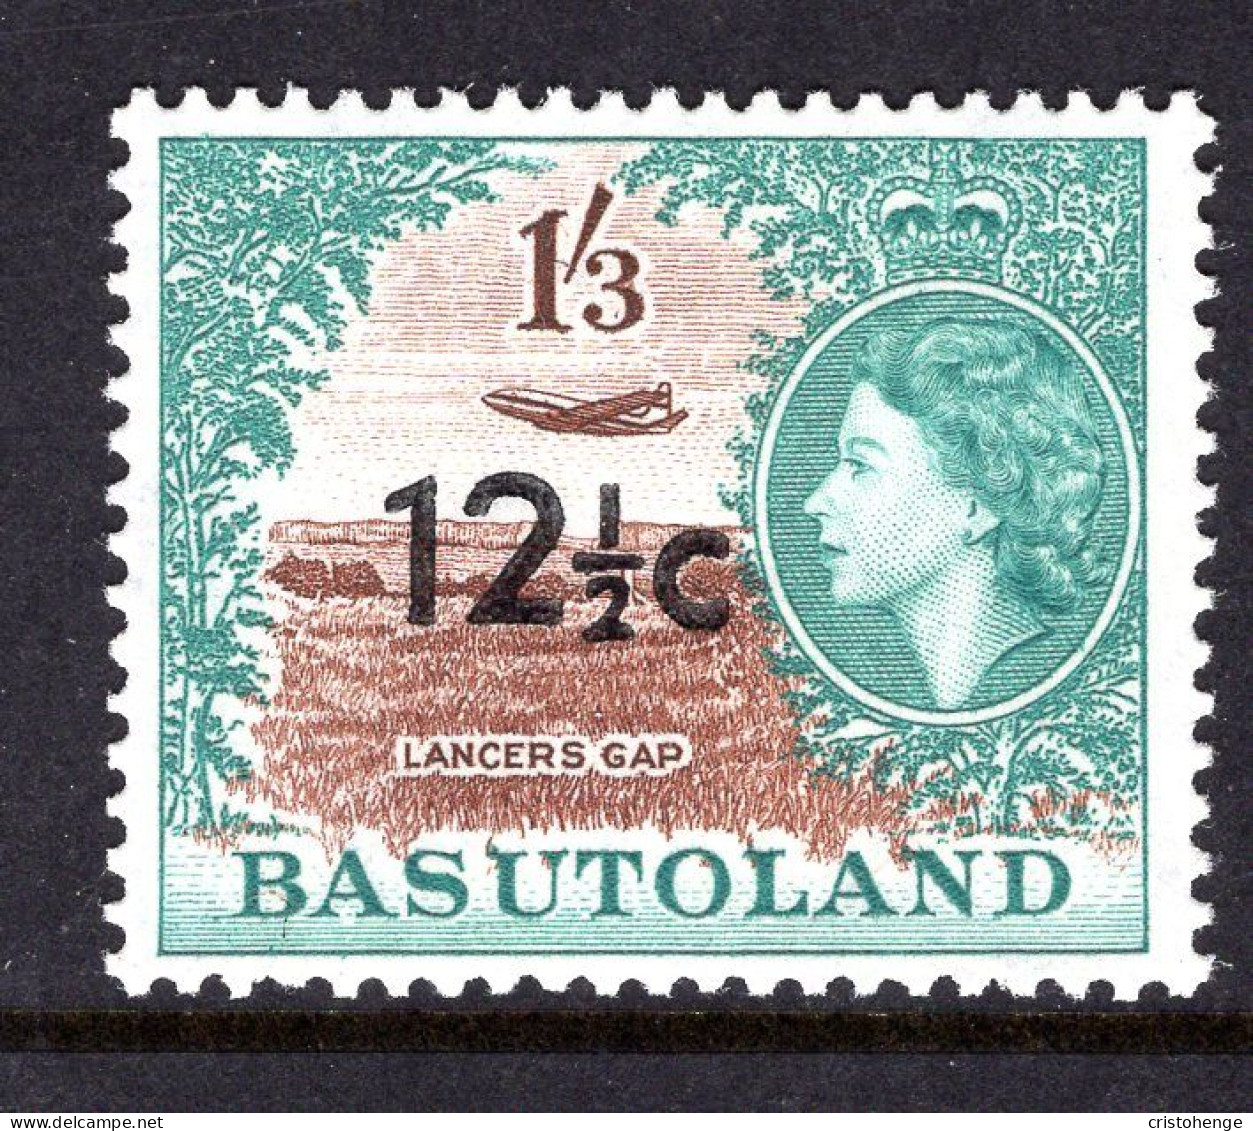 Basutoland 1961 Decimal Surcharges - 12½c On 1/3 Aeroplane Over Lancers Gap - Type II - HM (SG 65a) - 1933-1964 Crown Colony